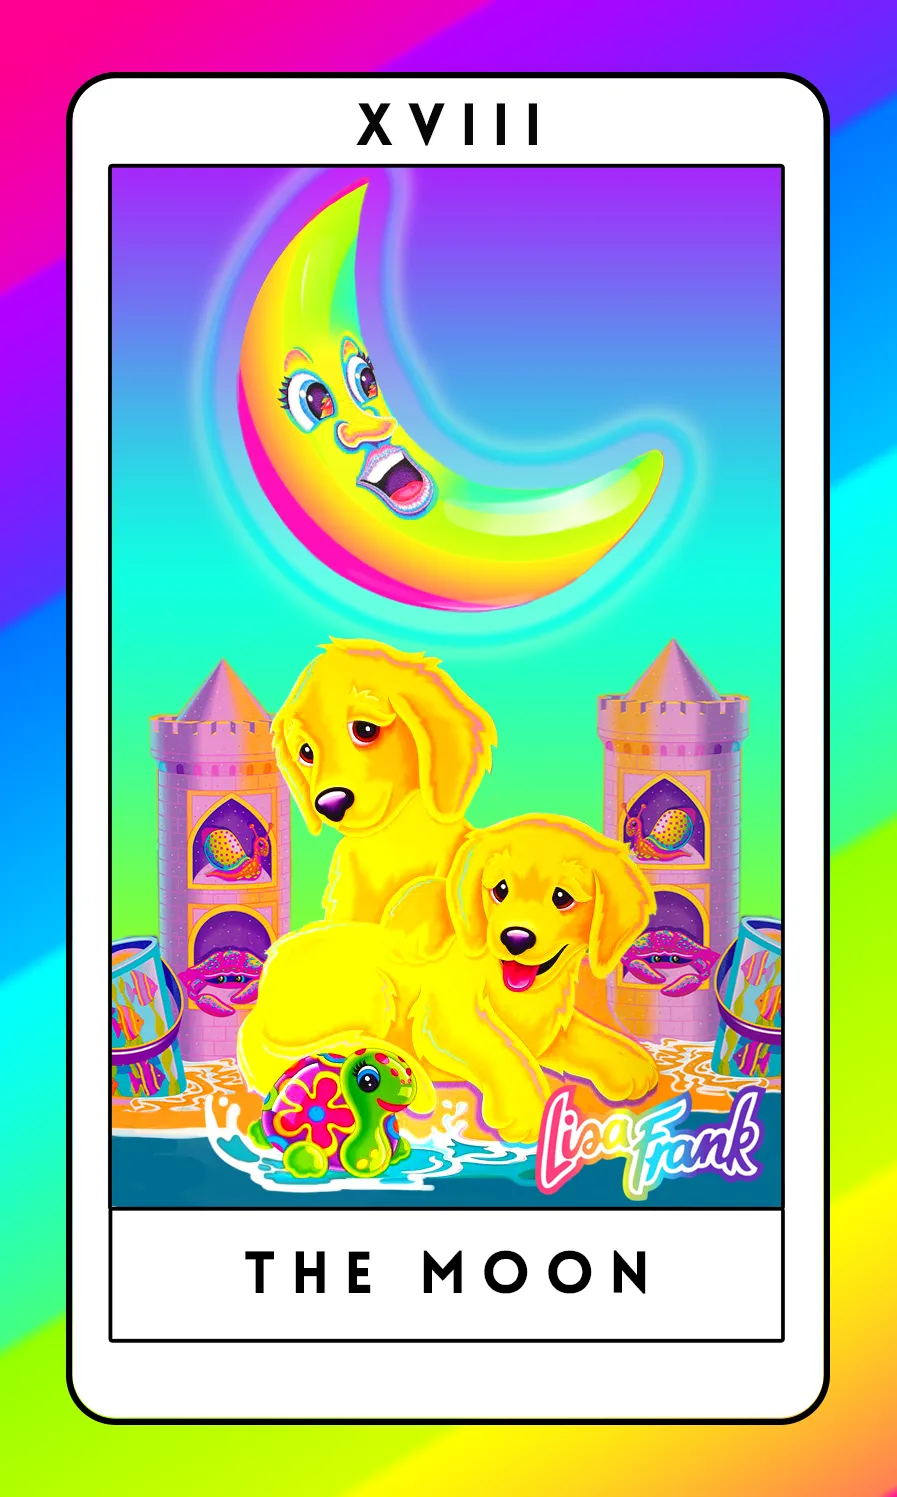 This Lisa Frank Tarot Deck Bring Out Inner | HuffPost Entertainment